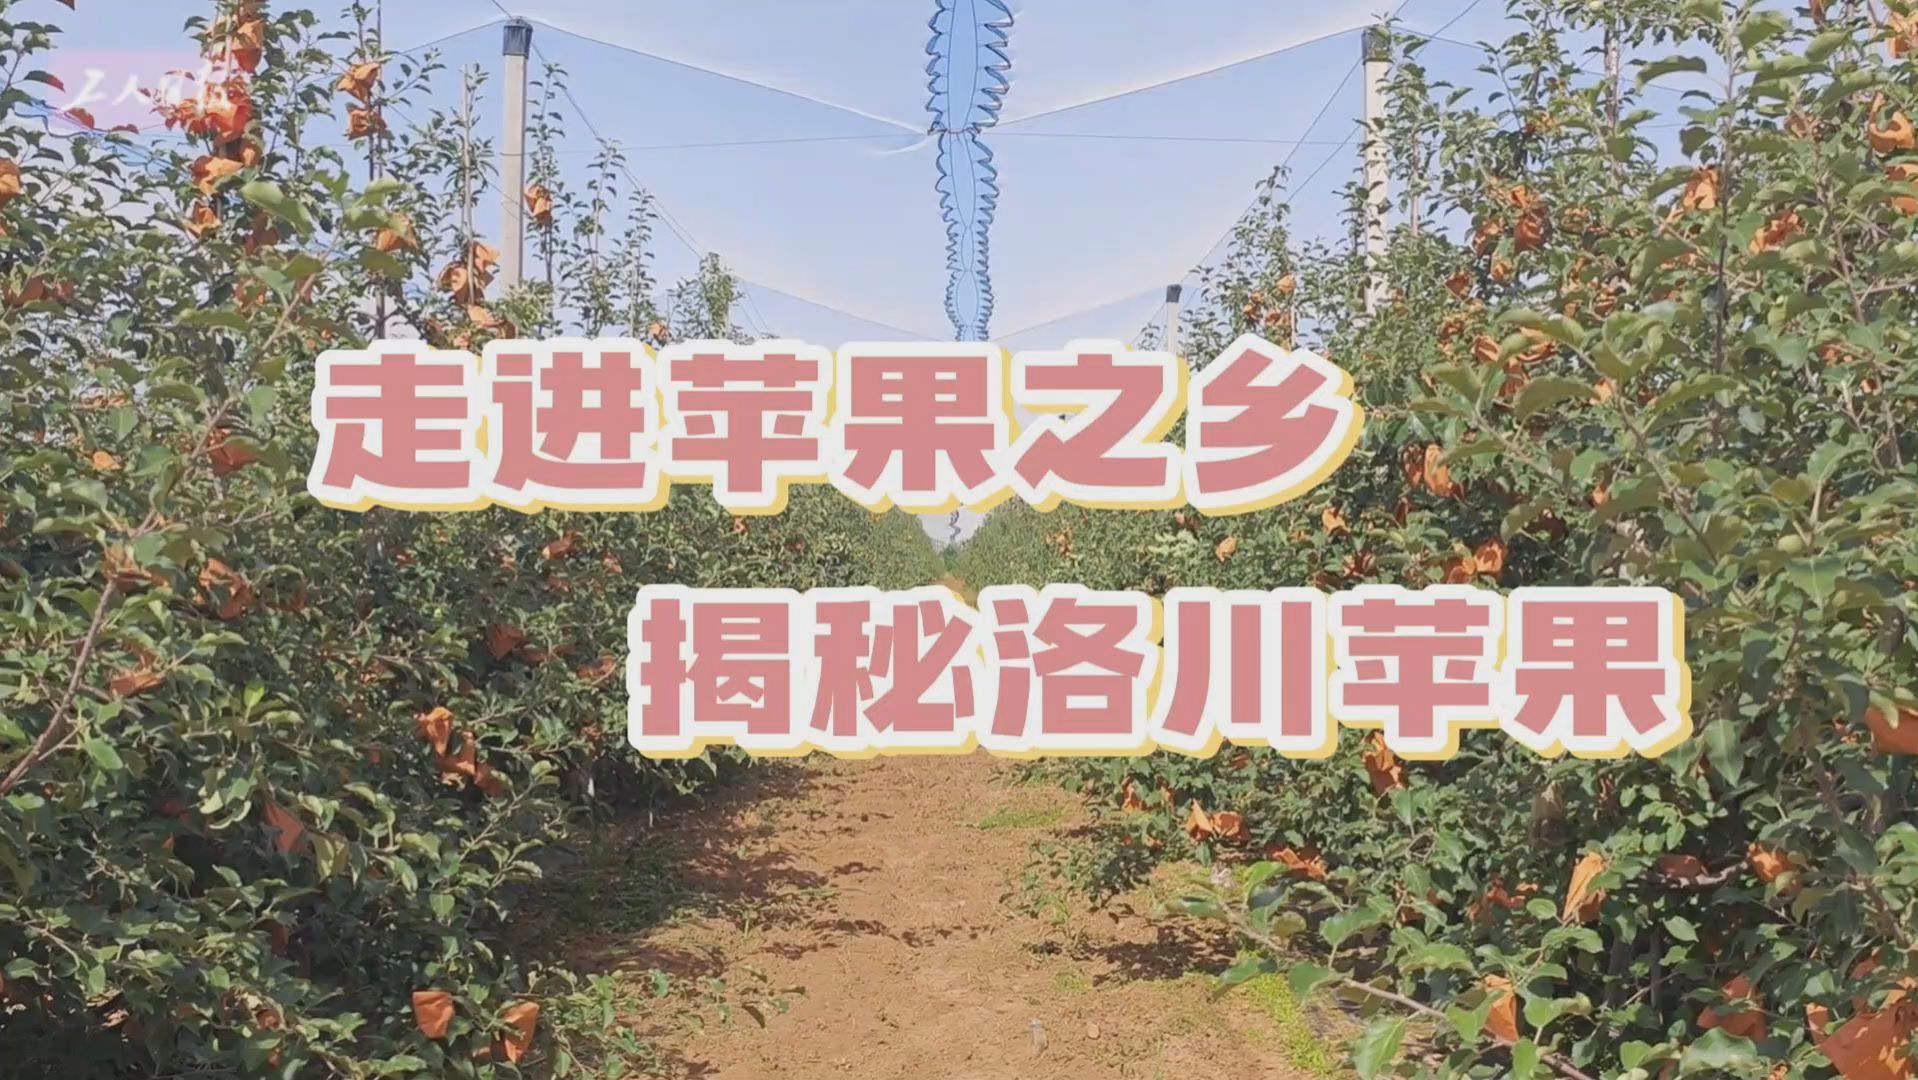  High quality development research trip | Go into the hometown of apples and reveal the secrets of Luochuan Apple